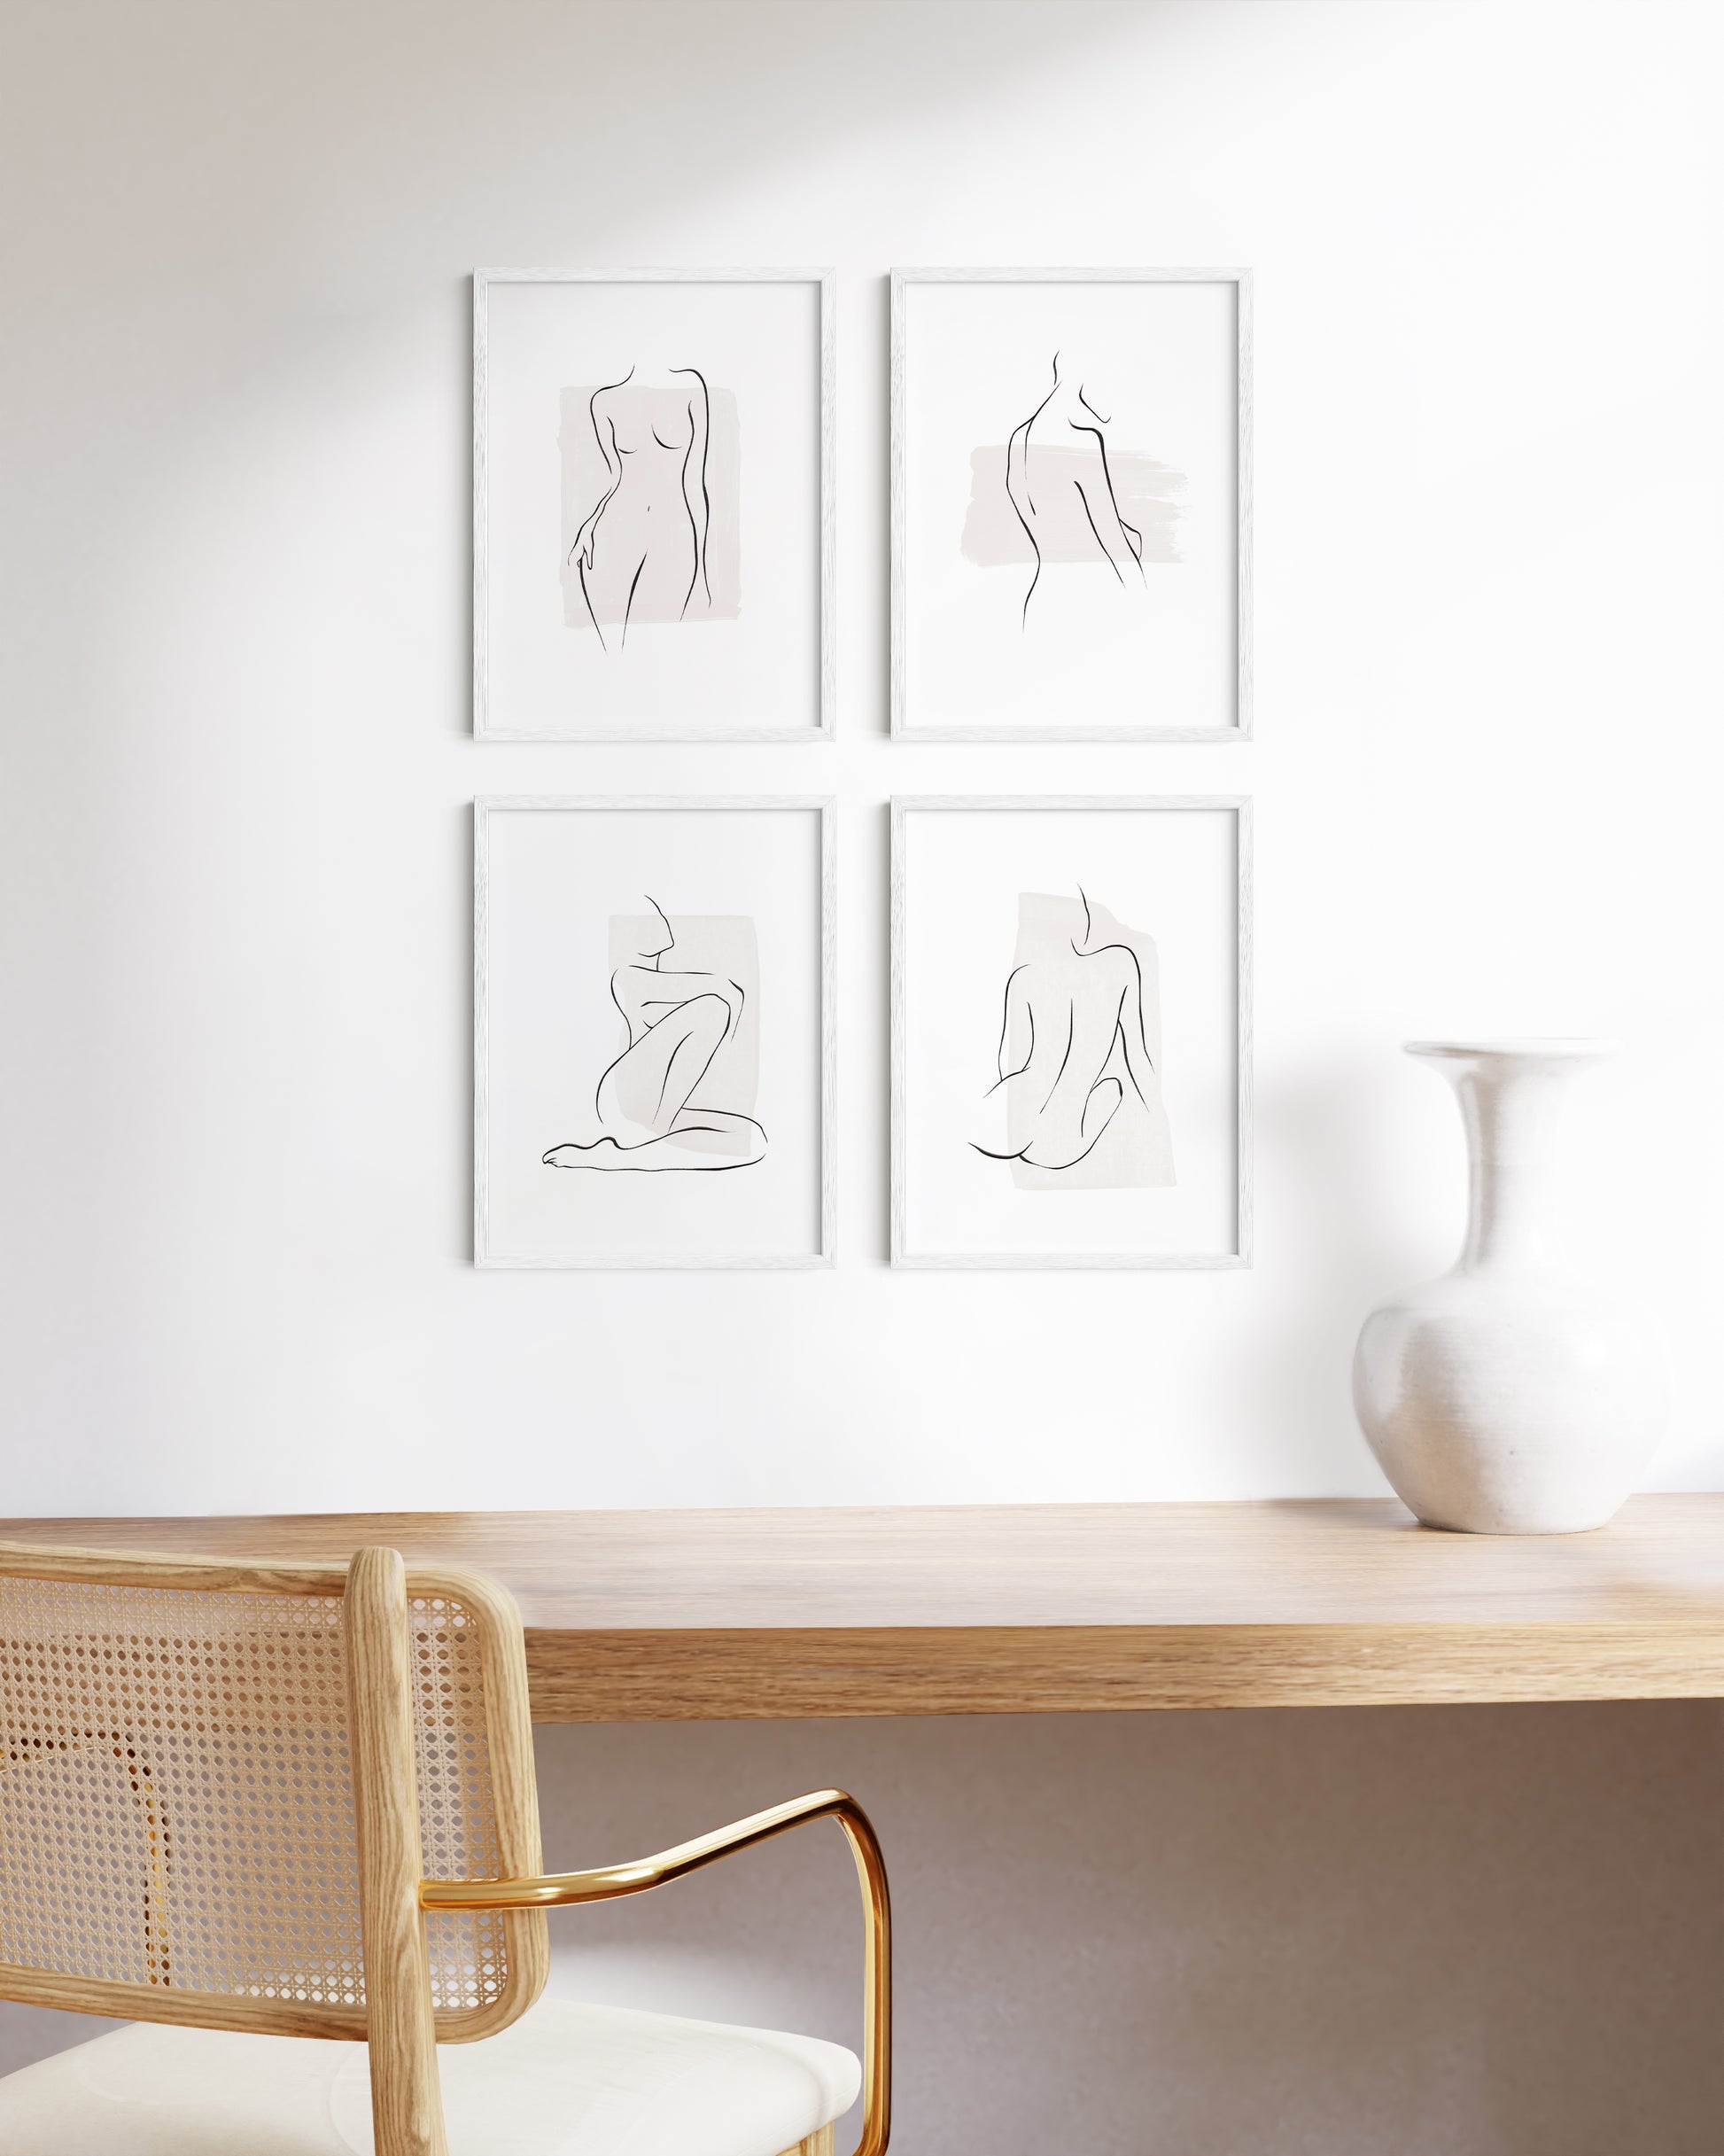 Haus and Hues Set of 4 16x20 Frames White - 16x20 Picture Frames for Wall  White Photo Frames, 16x20 Poster Frames for Wall White Picture Frames Pack